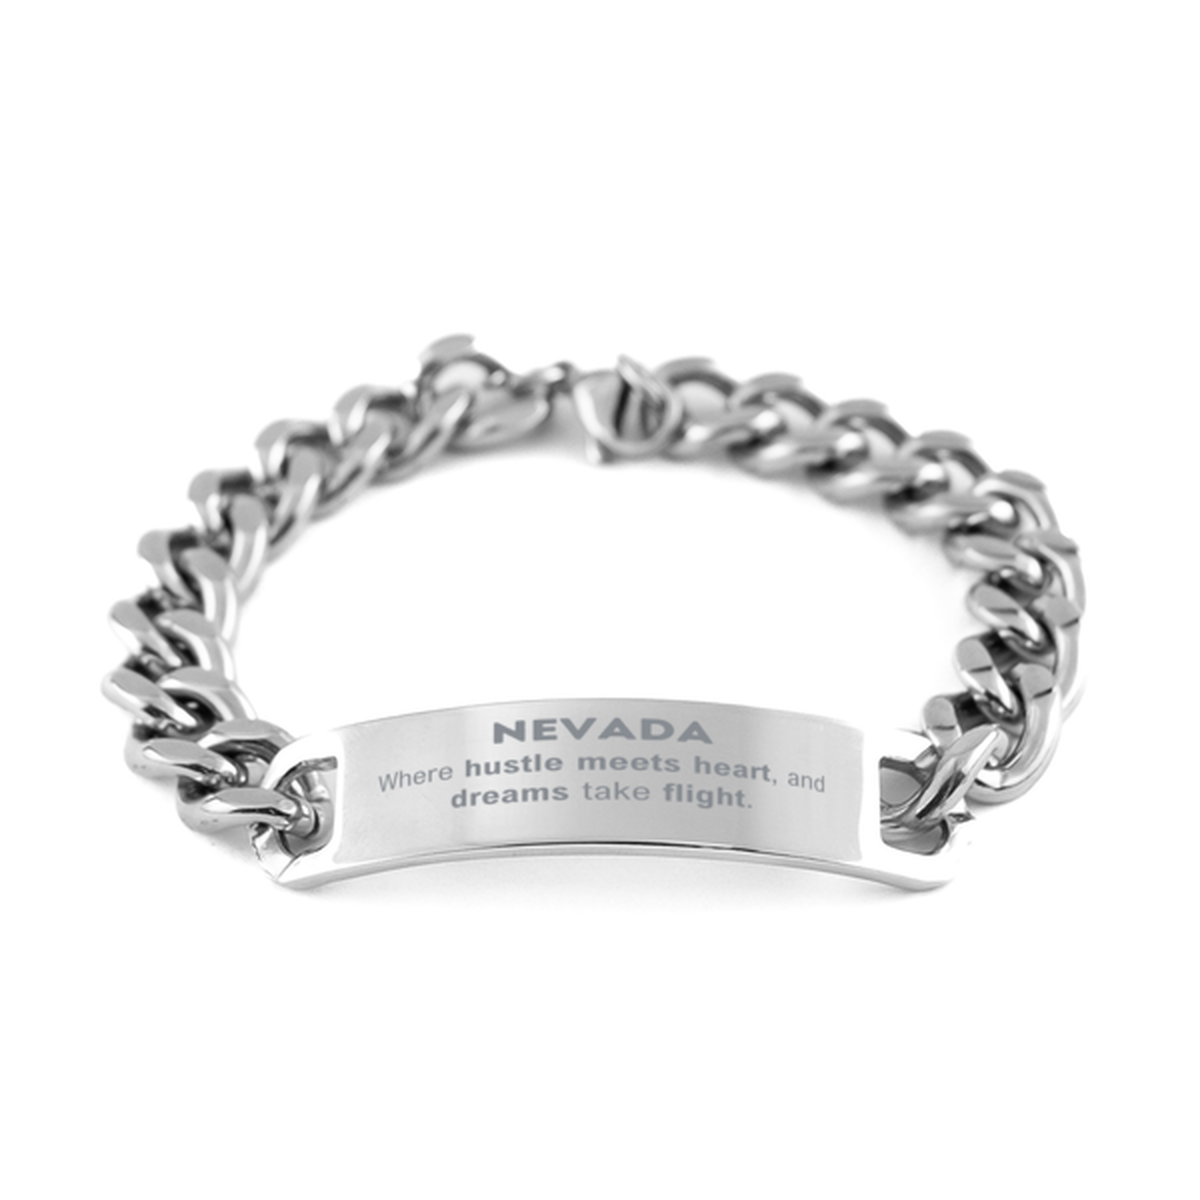 Nevada: Where hustle meets heart, and dreams take flight, Nevada Gifts, Proud Nevada Christmas Birthday Nevada Cuban Chain Stainless Steel Bracelet, Nevada State People, Men, Women, Friends